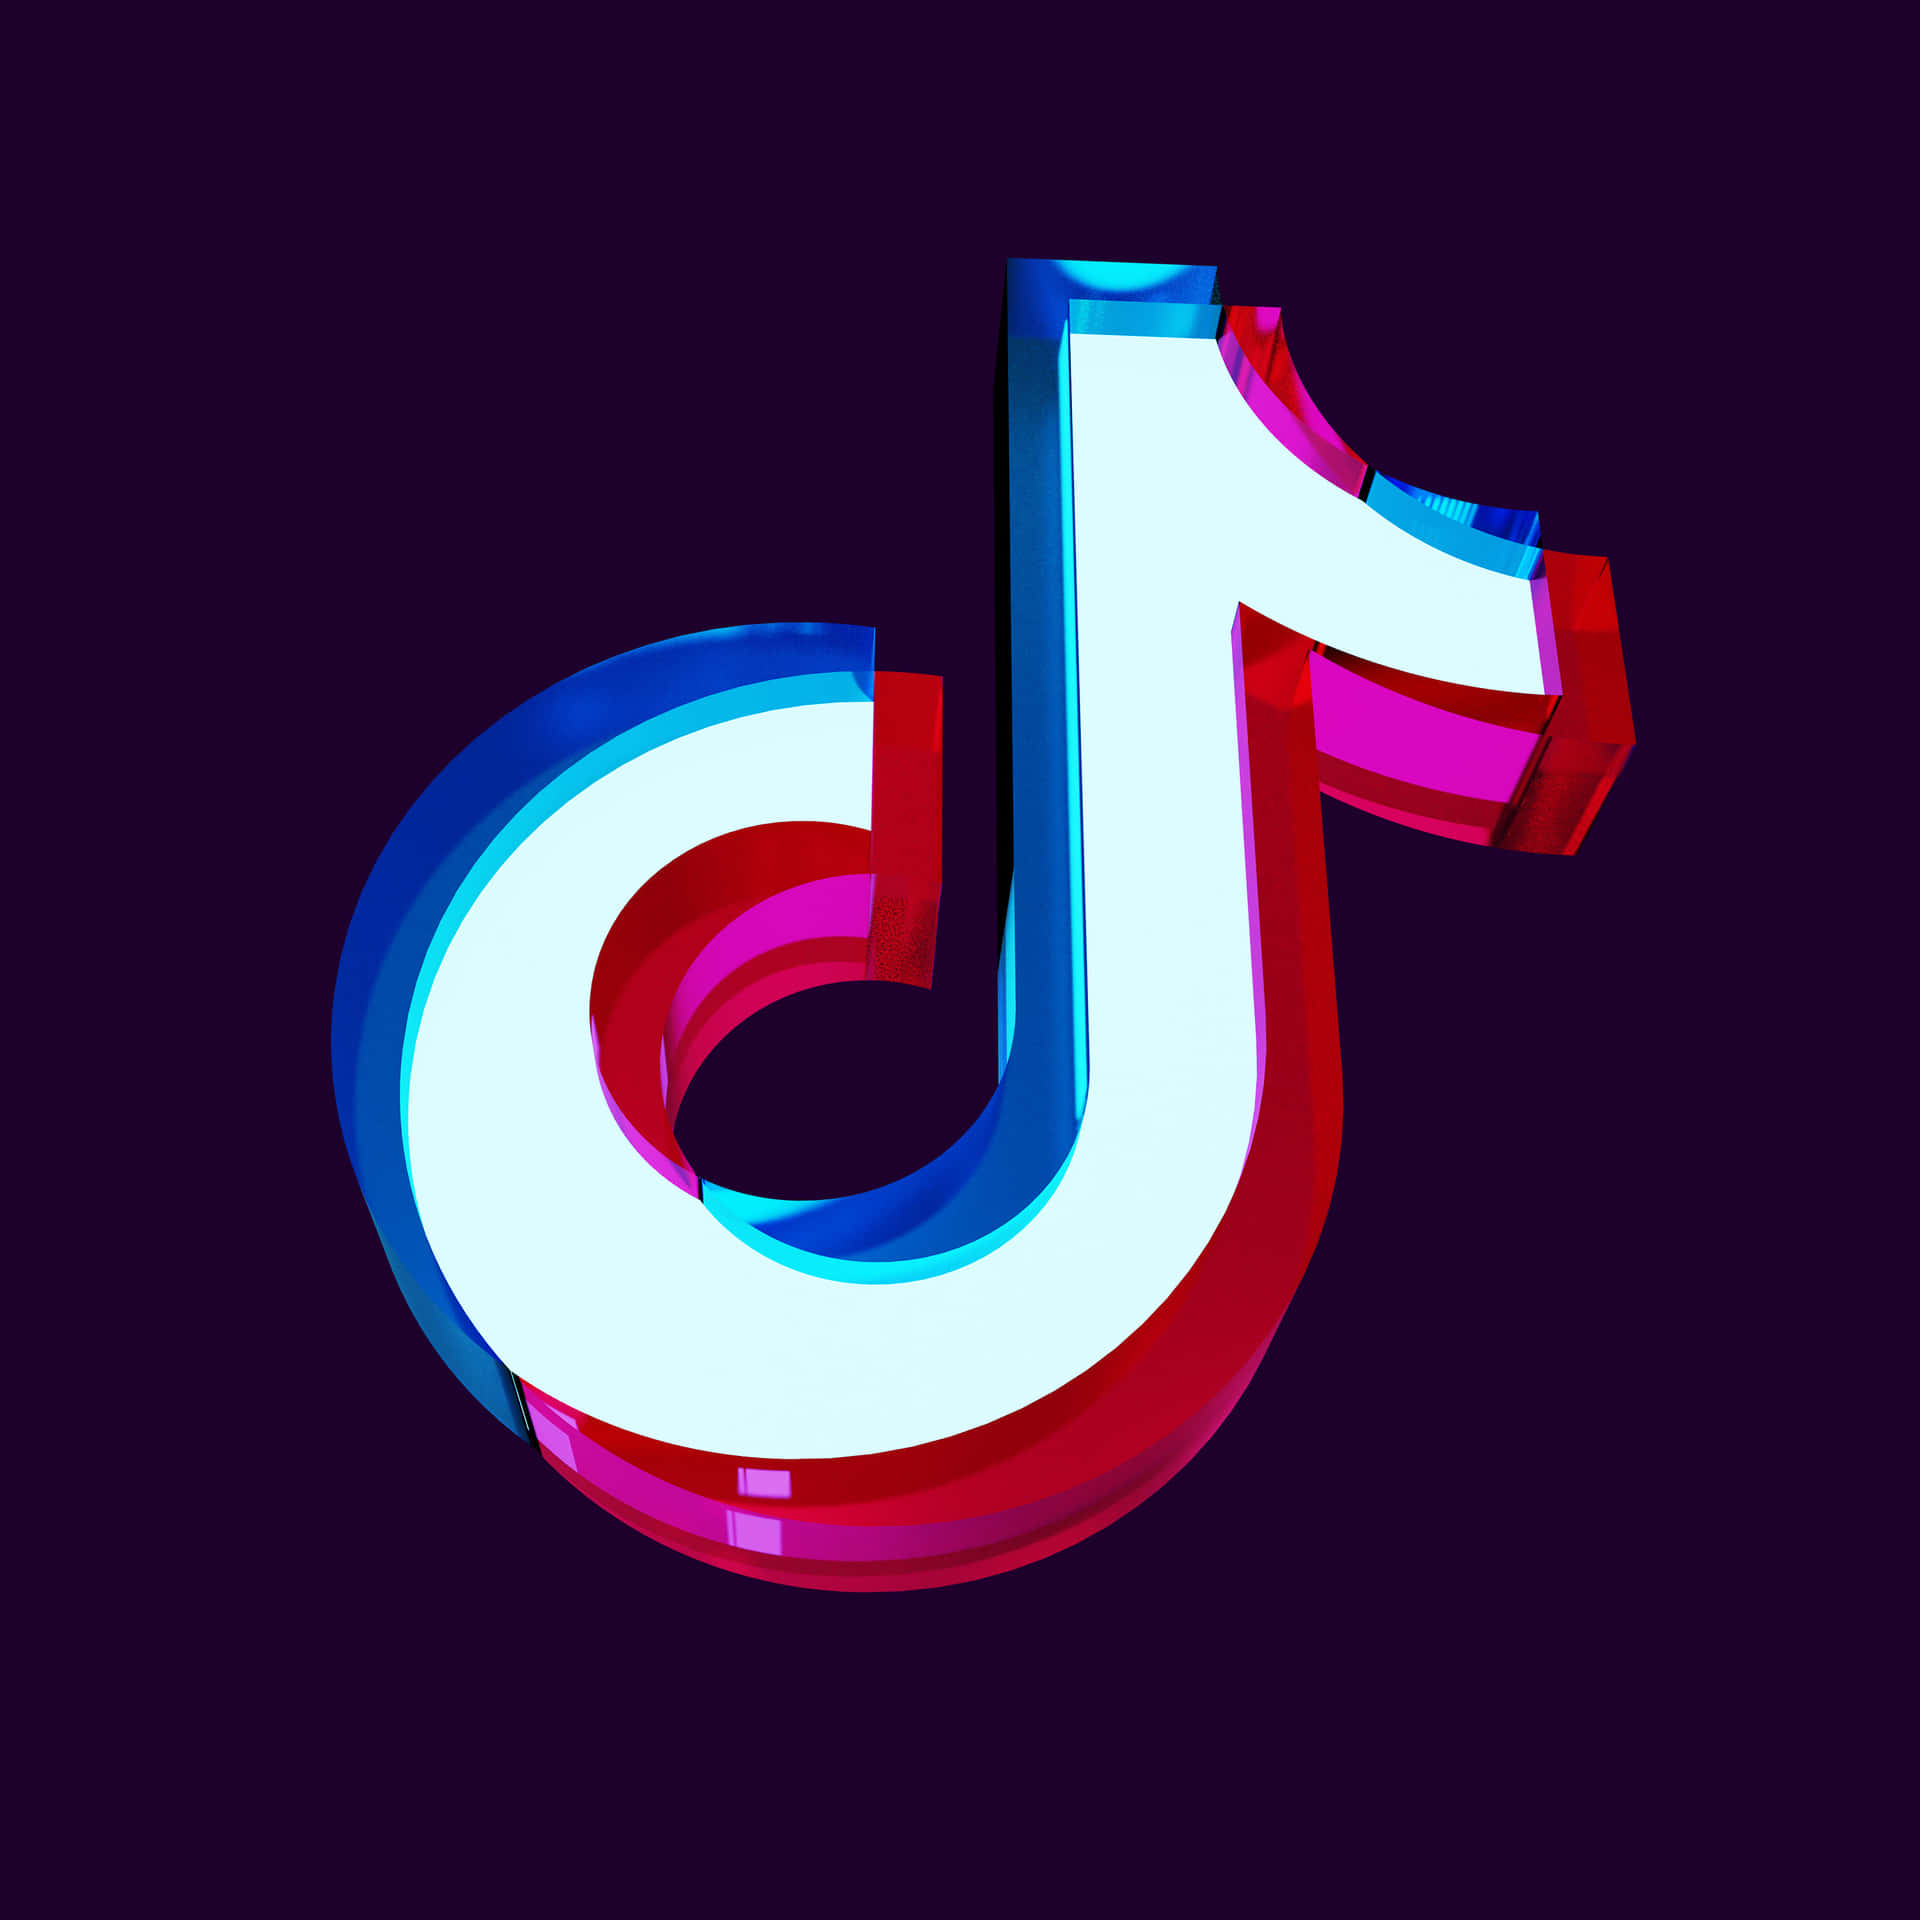 Tiktok Logo With A Colorful Background Wallpaper